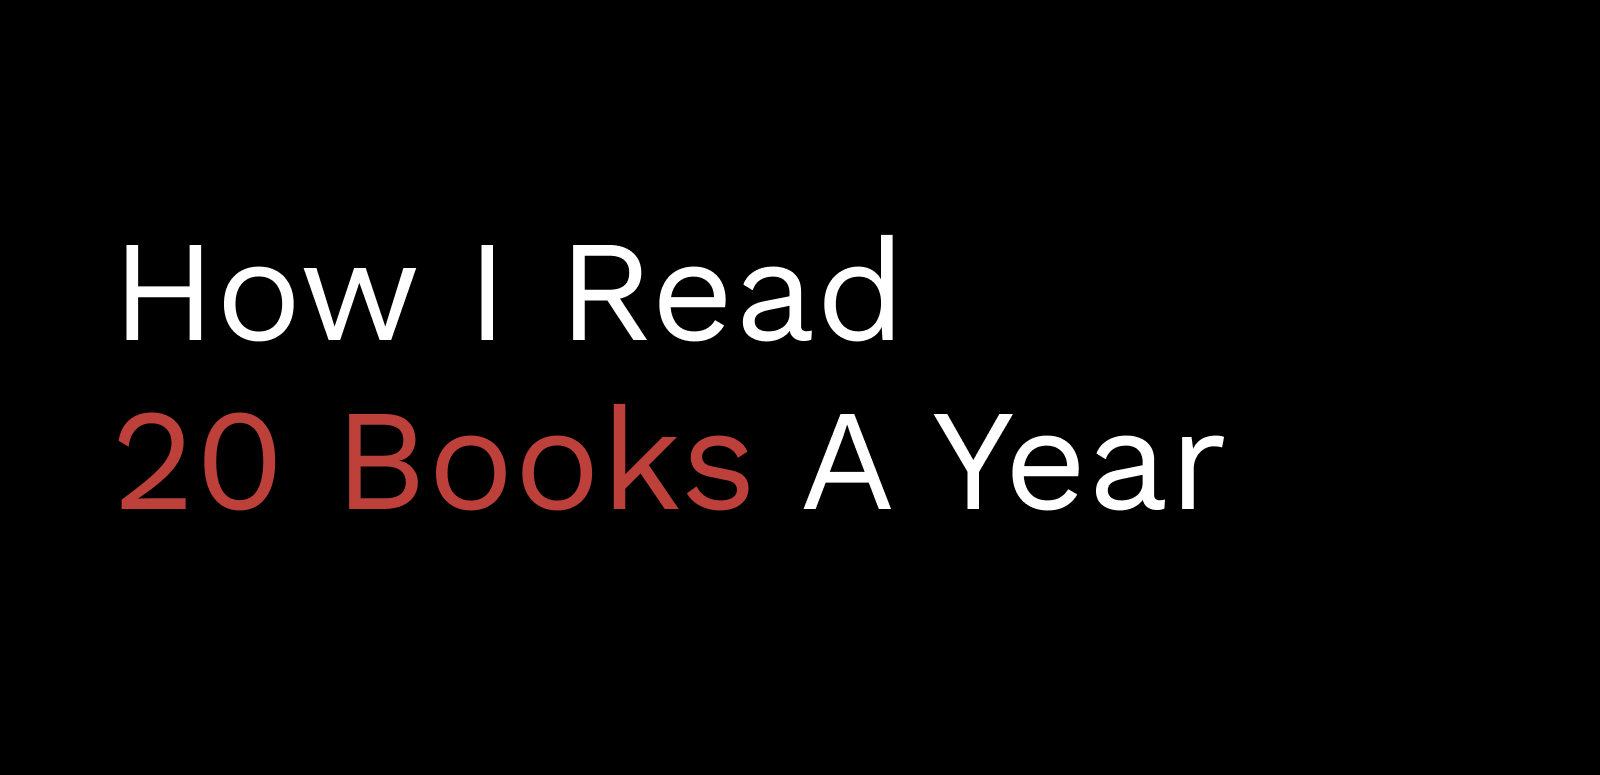 How I Read 20 Books A Year